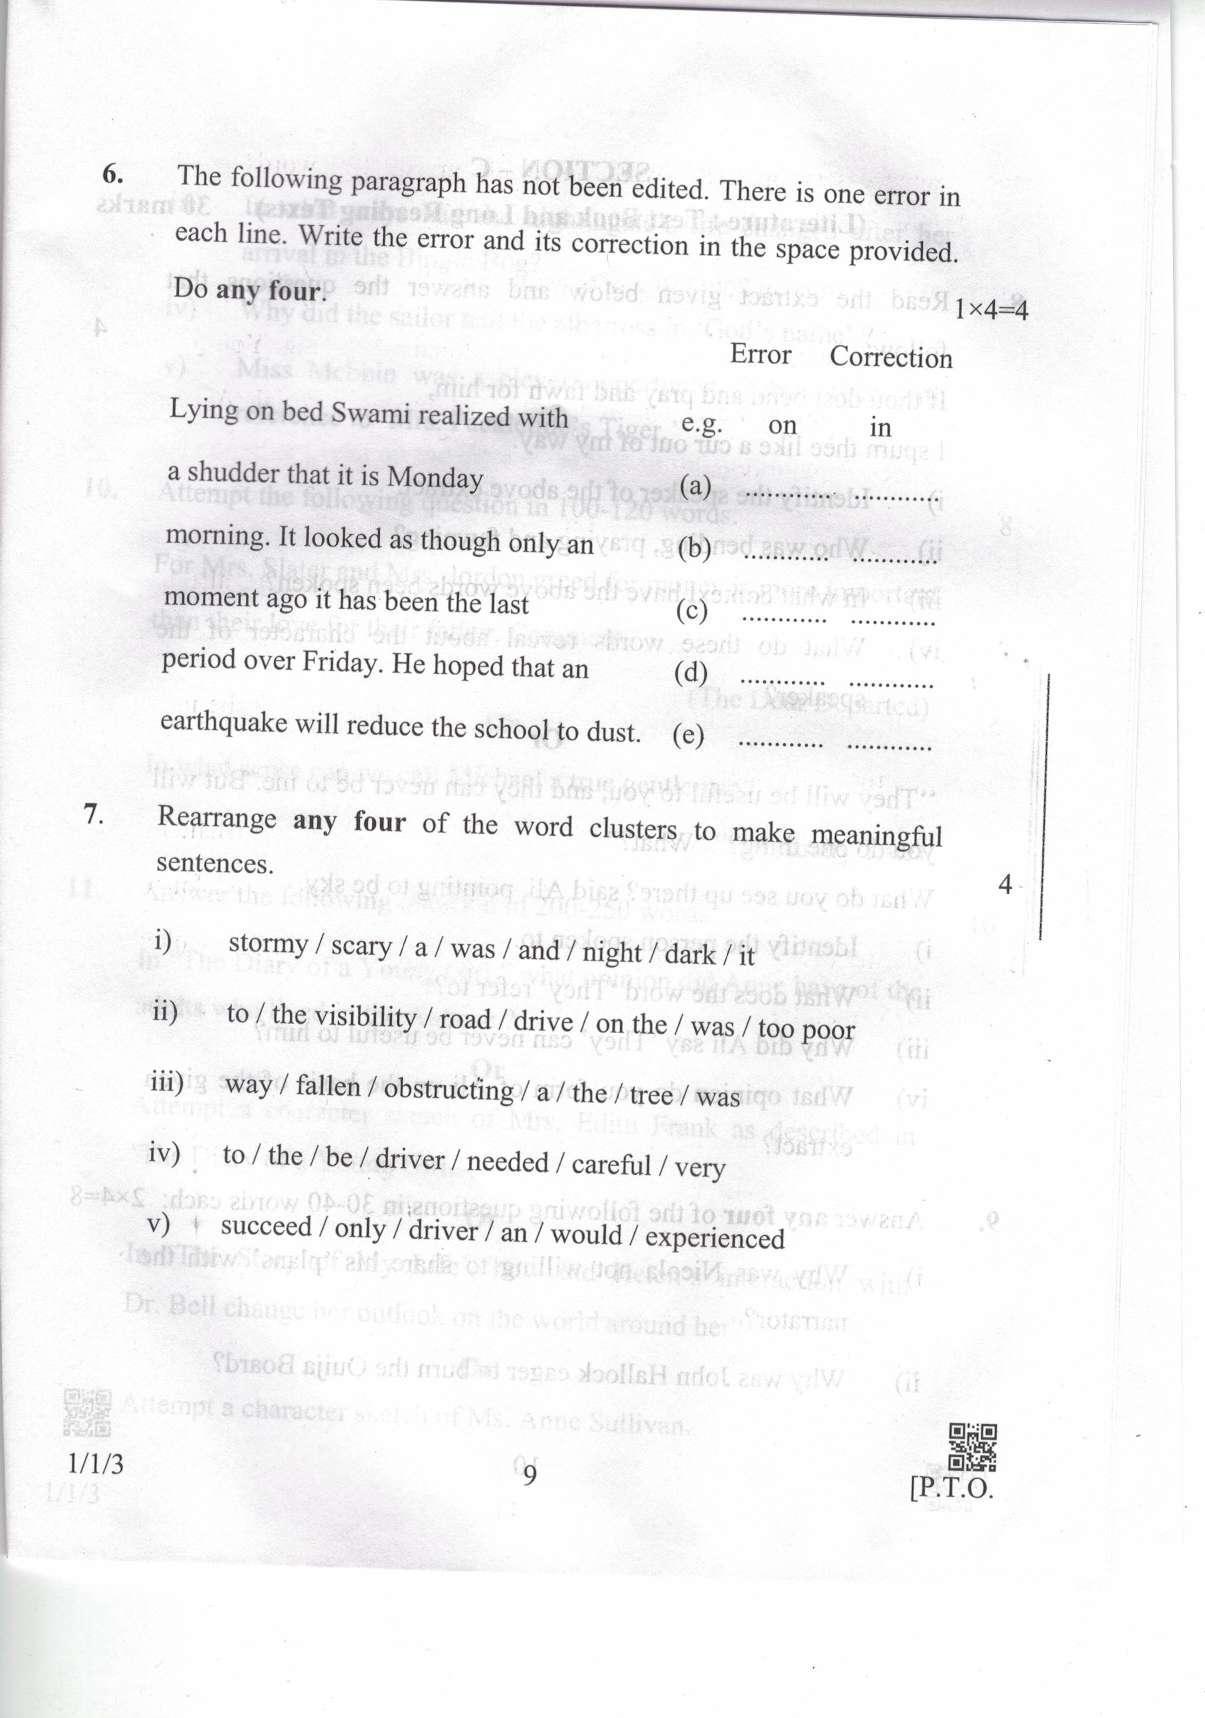 CBSE Class 10 1-1-3 Eng. Comm. 2019 Question Paper - Page 9